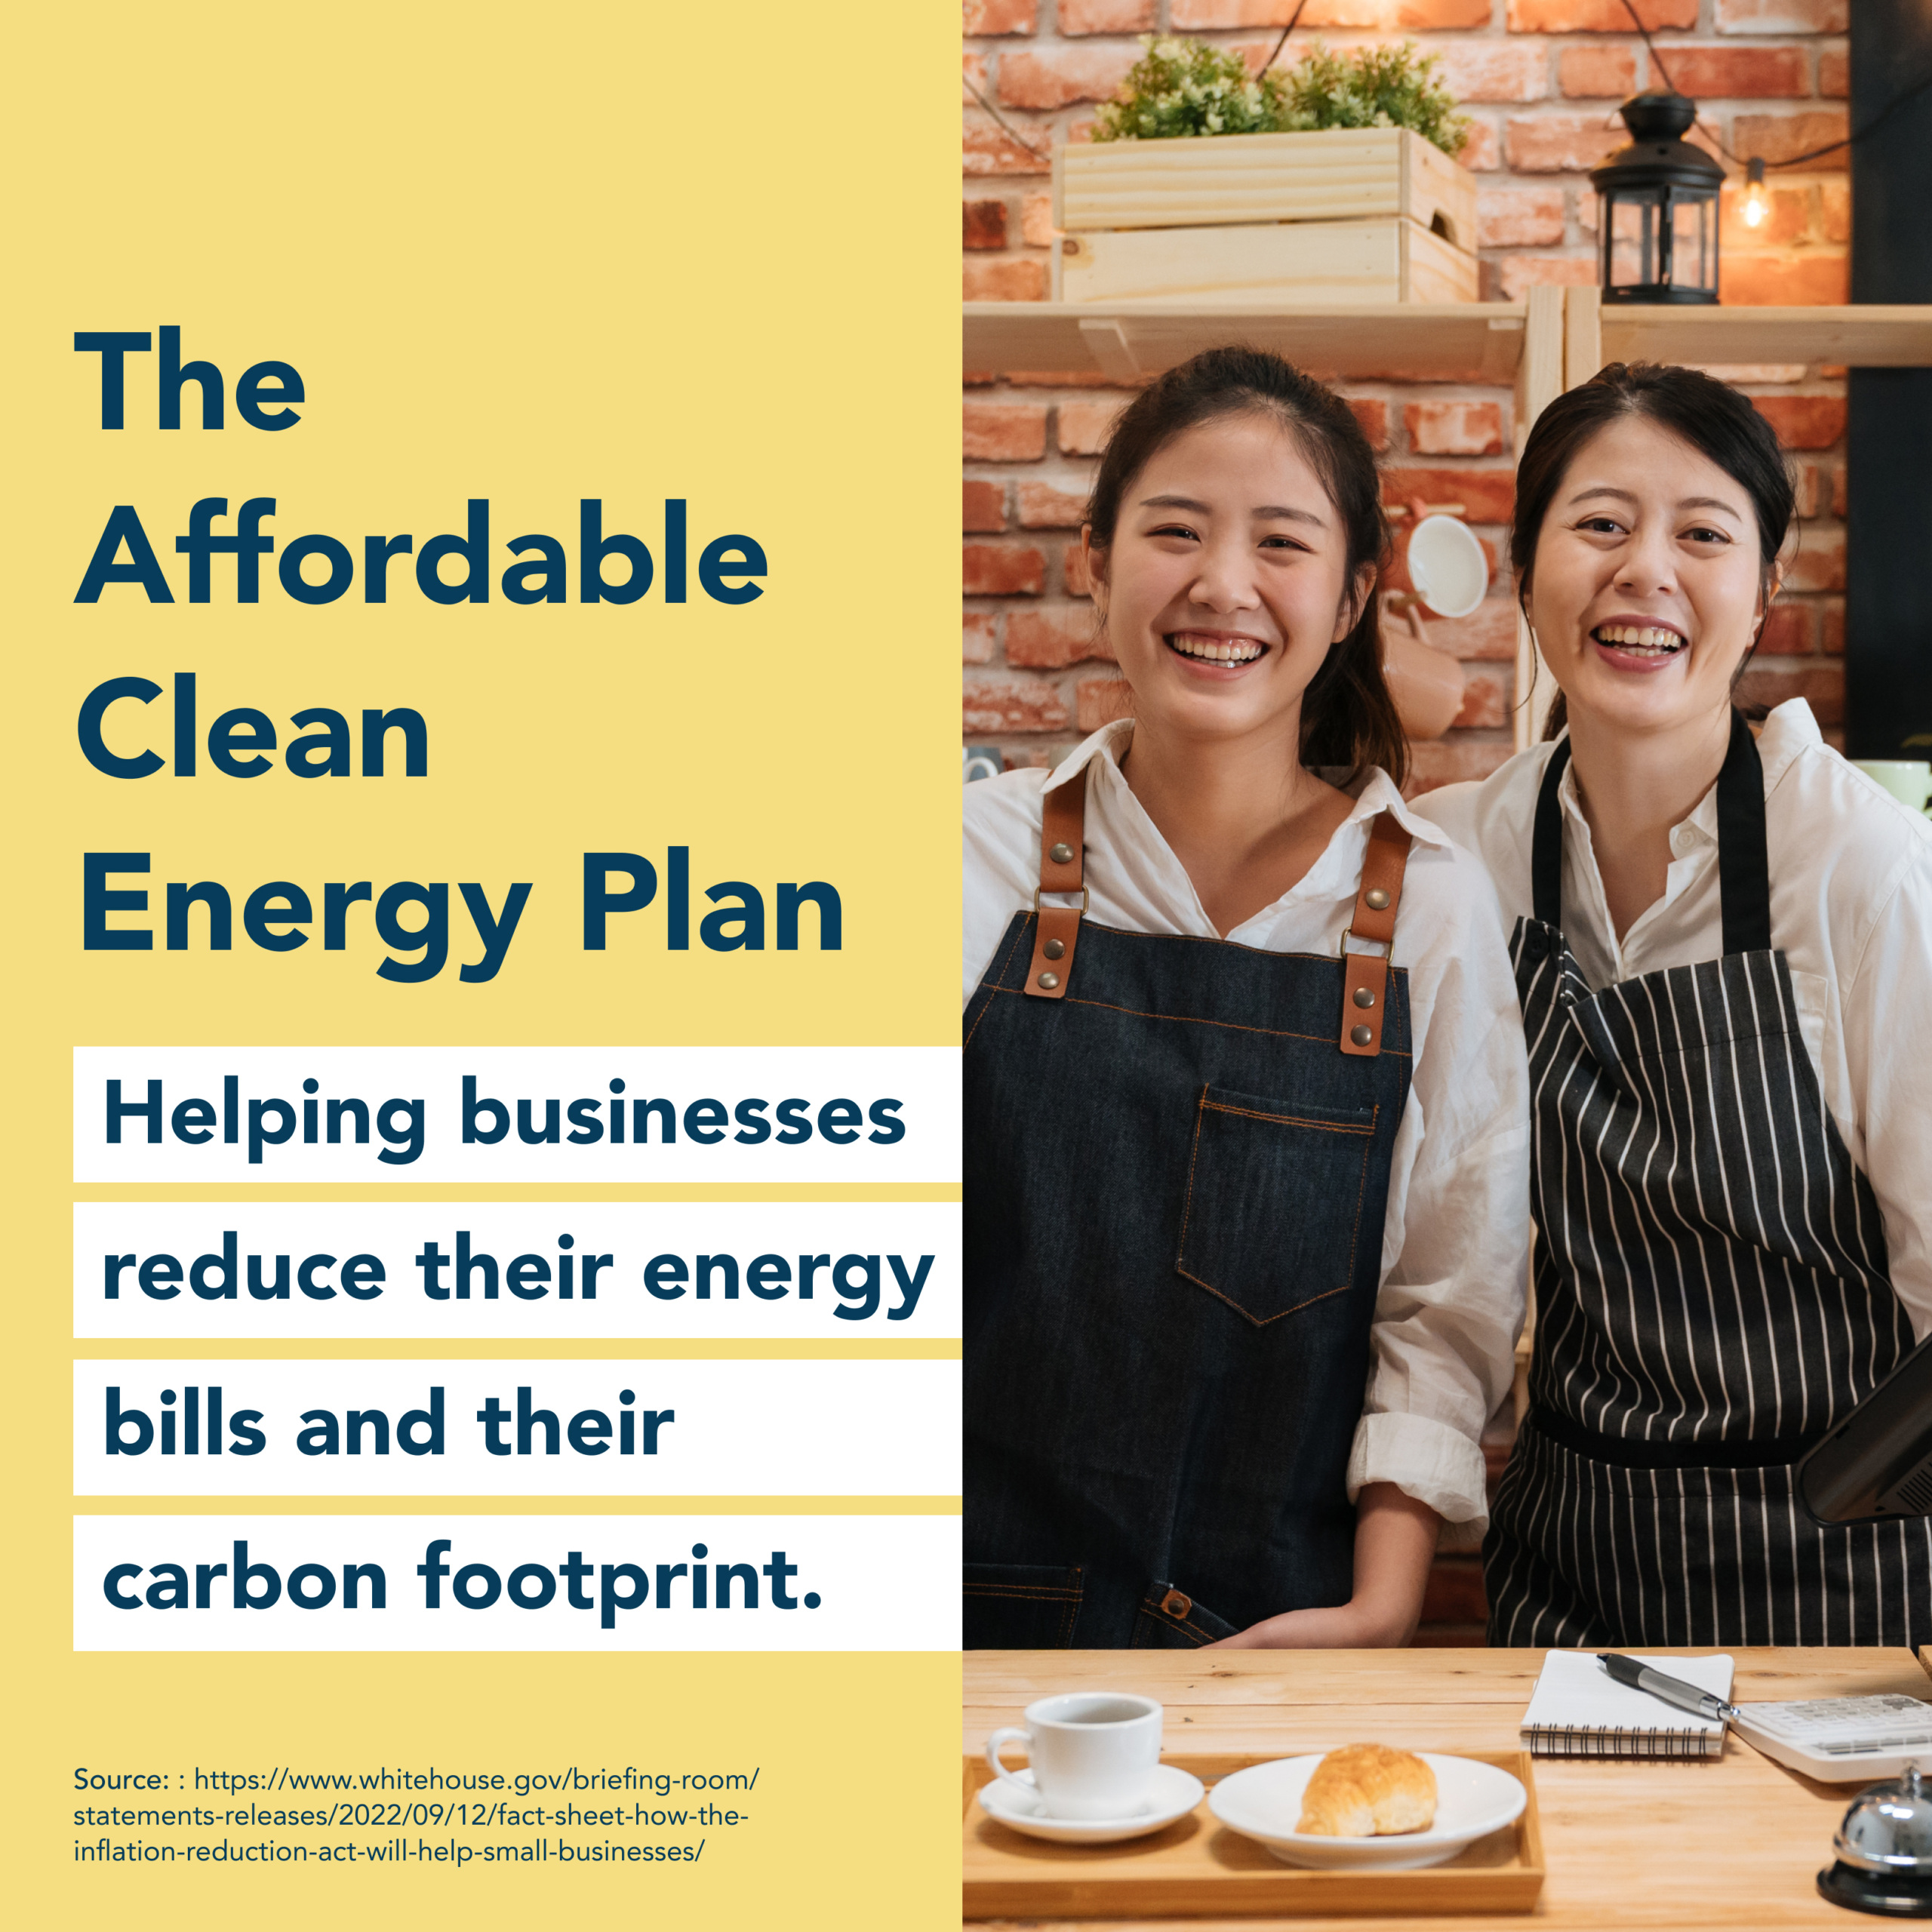 A yellow graphic. On the right side is an image of two people smiling. They appear to be in a cafe. On the left, text reads The Affordable Clean Energy Plan. Helping businesses reduce their energy bills and their carbon footprint.